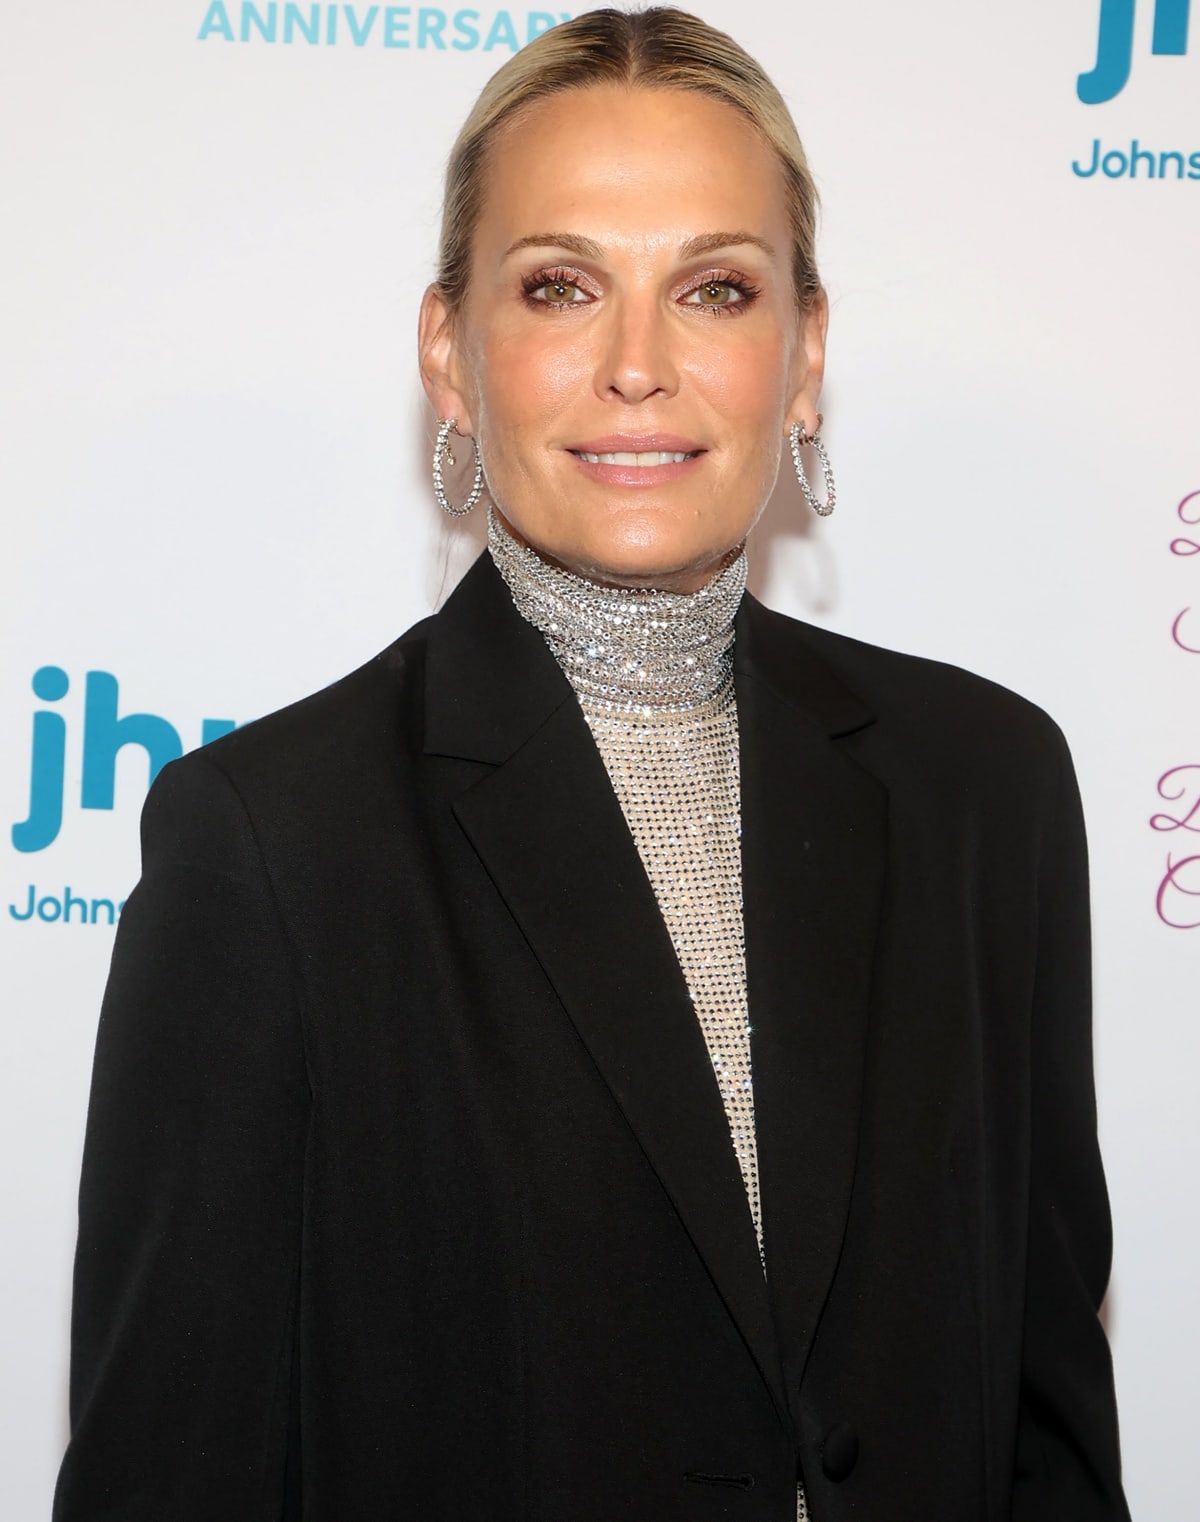 Molly Sims’ success is attributed not only to her talent and determination, but also to her genuine kindness and willingness to help other people